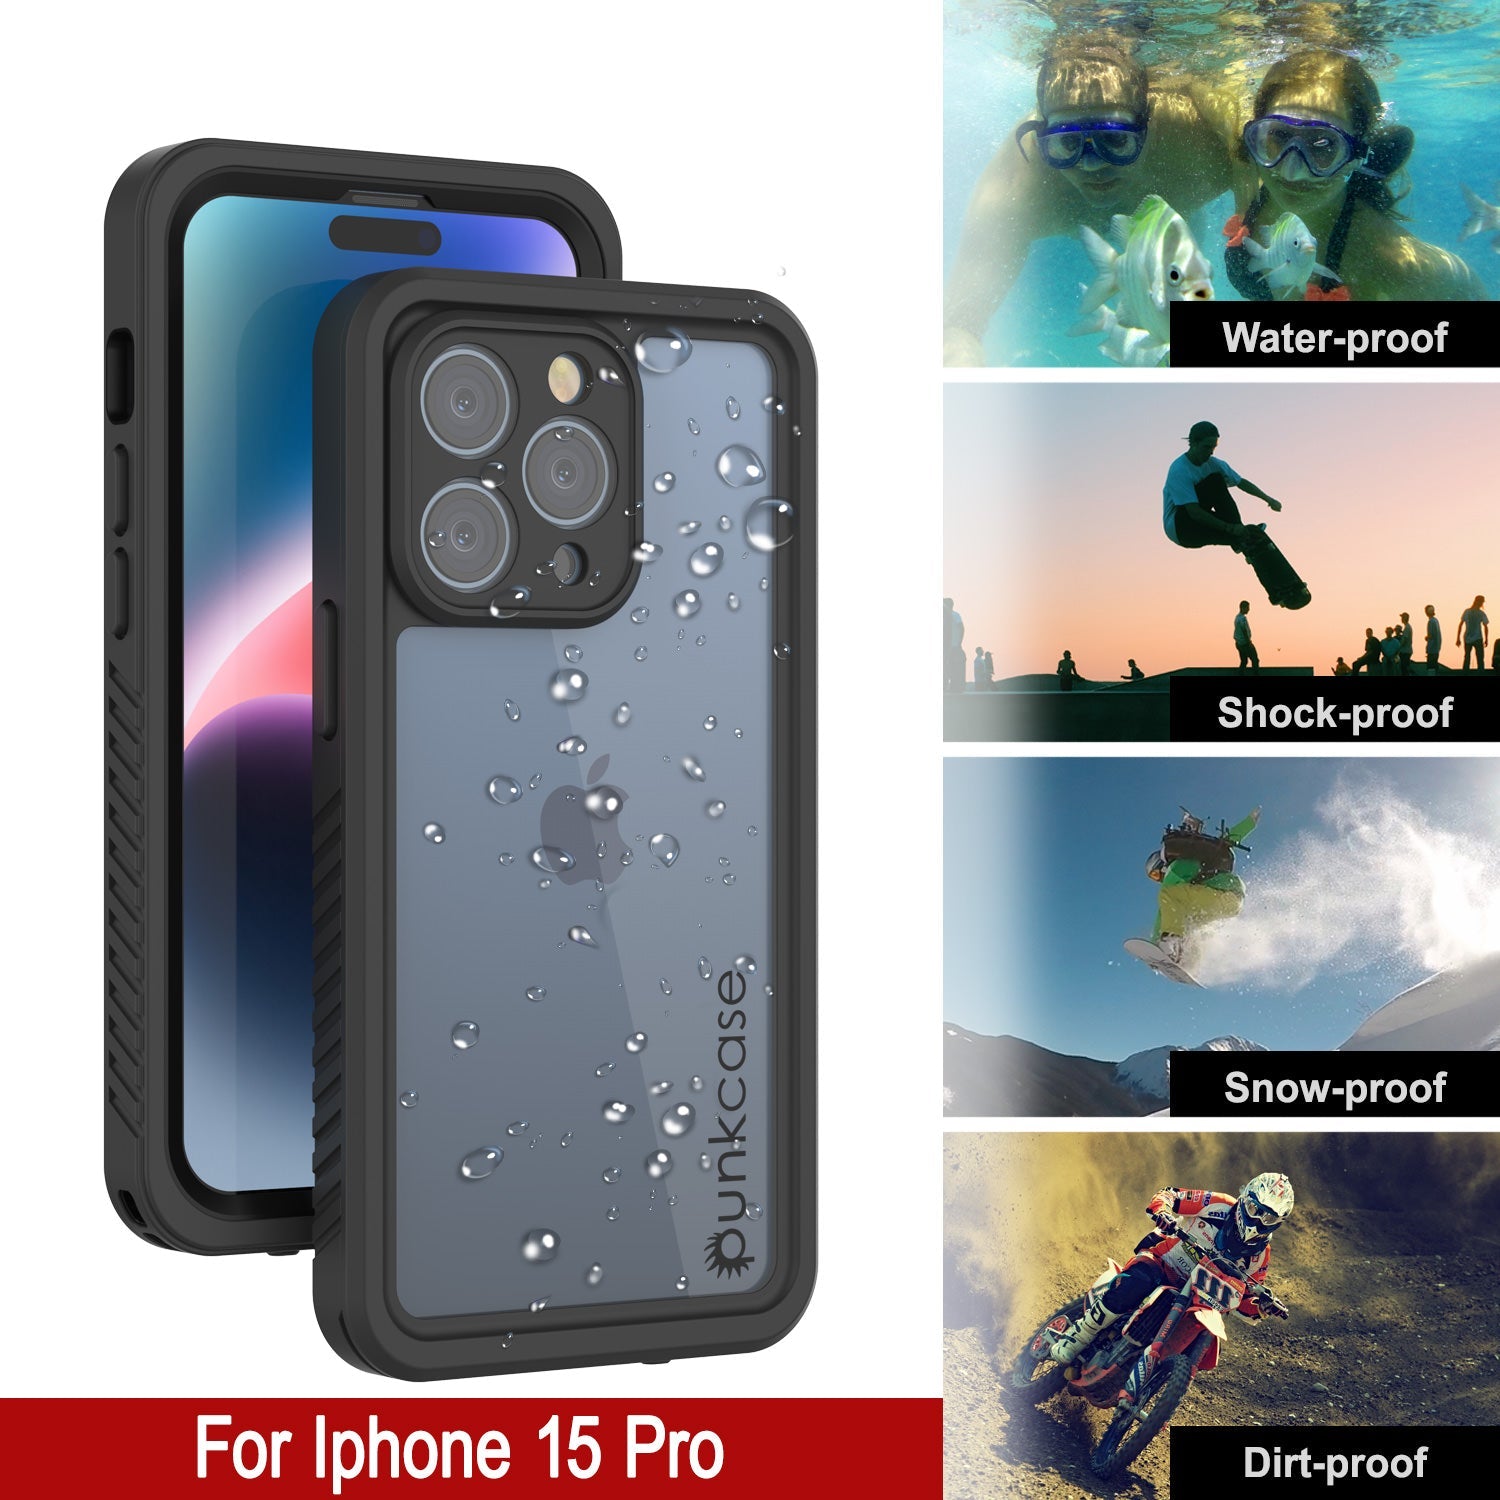 iPhone 15 Pro Waterproof Case, Punkcase [Extreme Series] Armor Cover W/ Built In Screen Protector [Black]